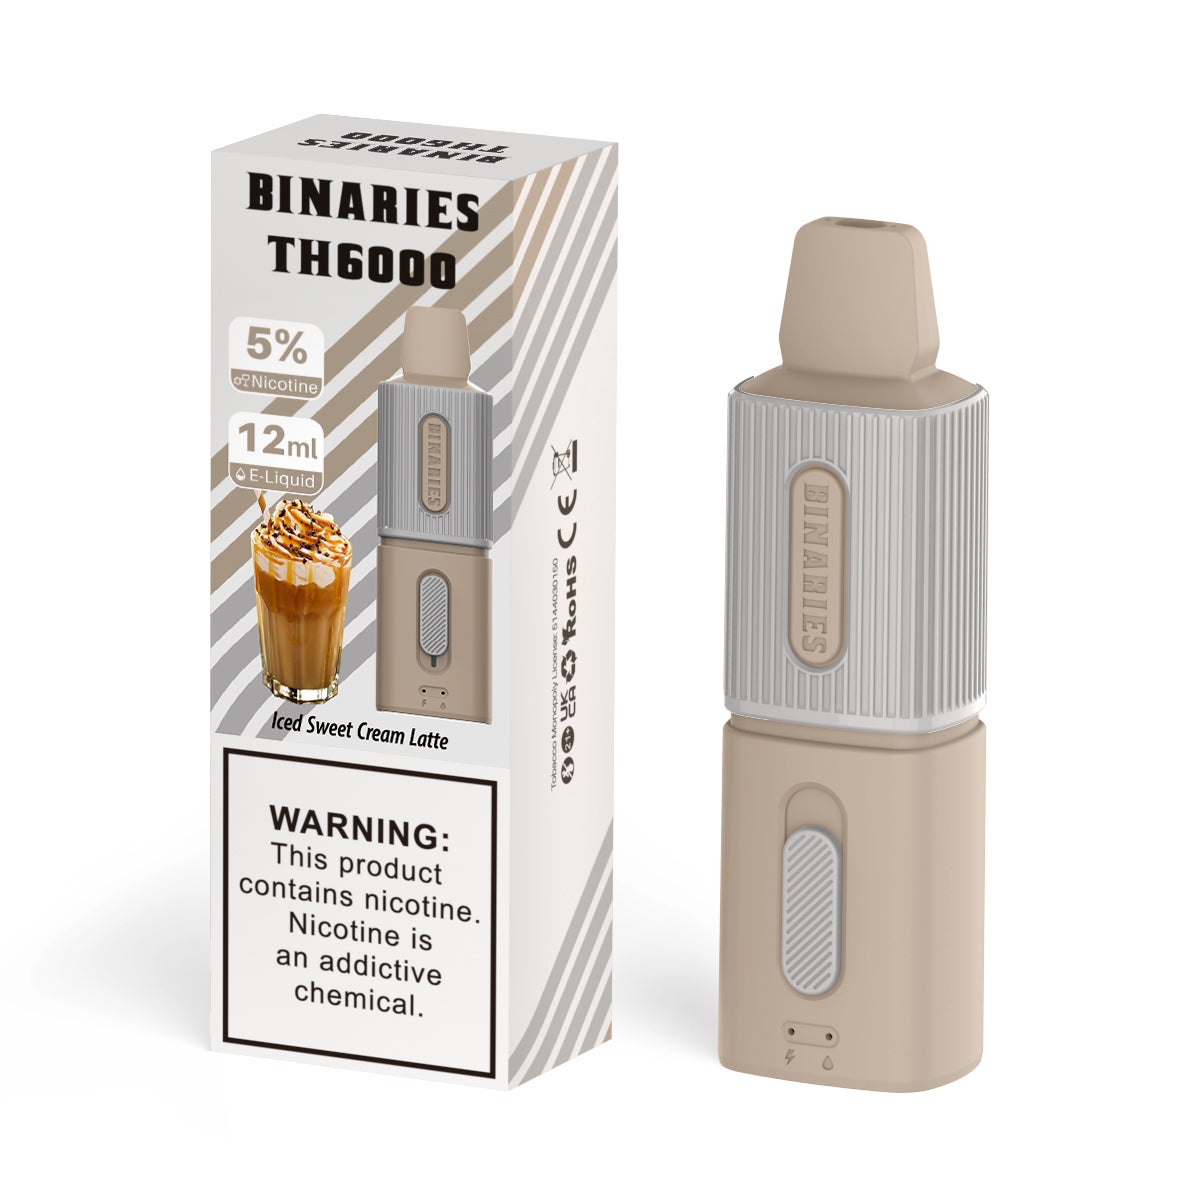 Binaries Cabin Disposable TH | 6000 Puffs | 12mL | 50mg Iced Sweet Cream Latte with Packaging